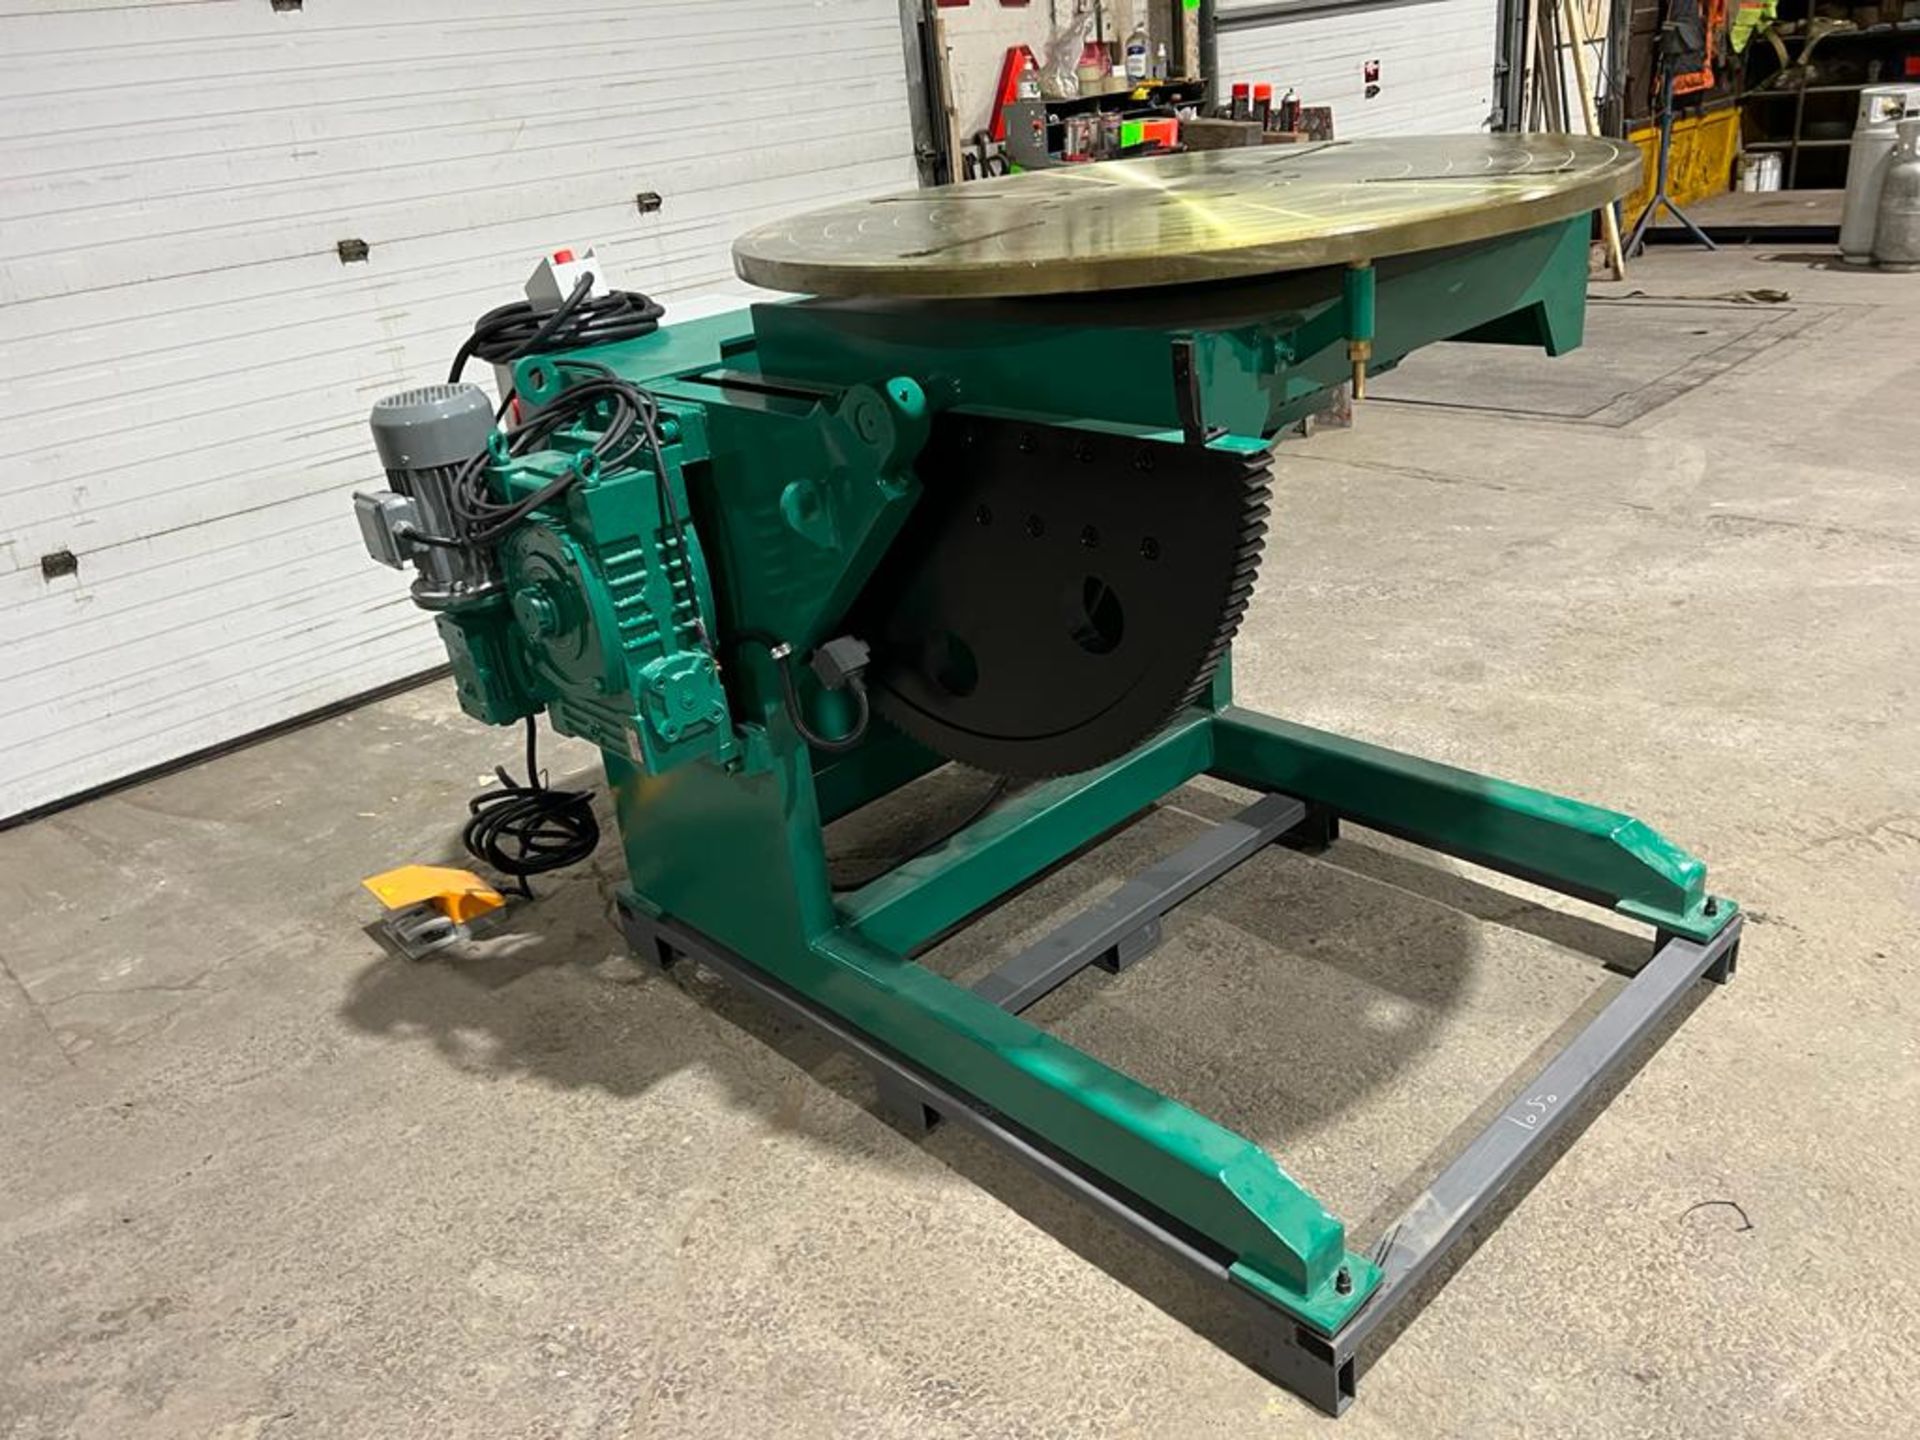 Verner model VD-5000 WELDING POSITIONER 1500lbs capacity - tilt and rotate with variable speed drive